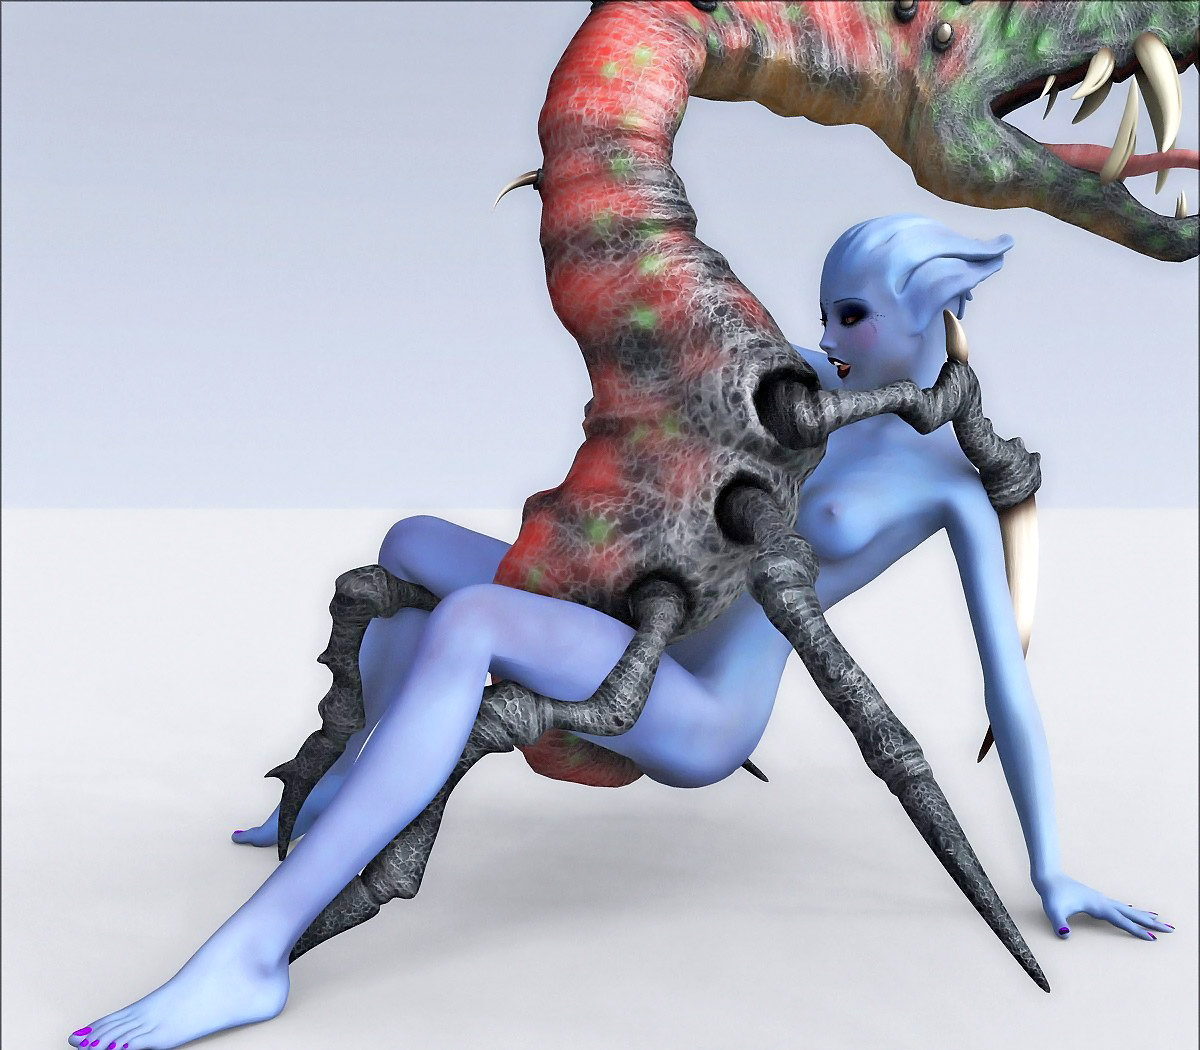 3d Huge Insect Porn - chick takes on big insect during 3d cartoon monster sex | 3dwerewolfporn.com